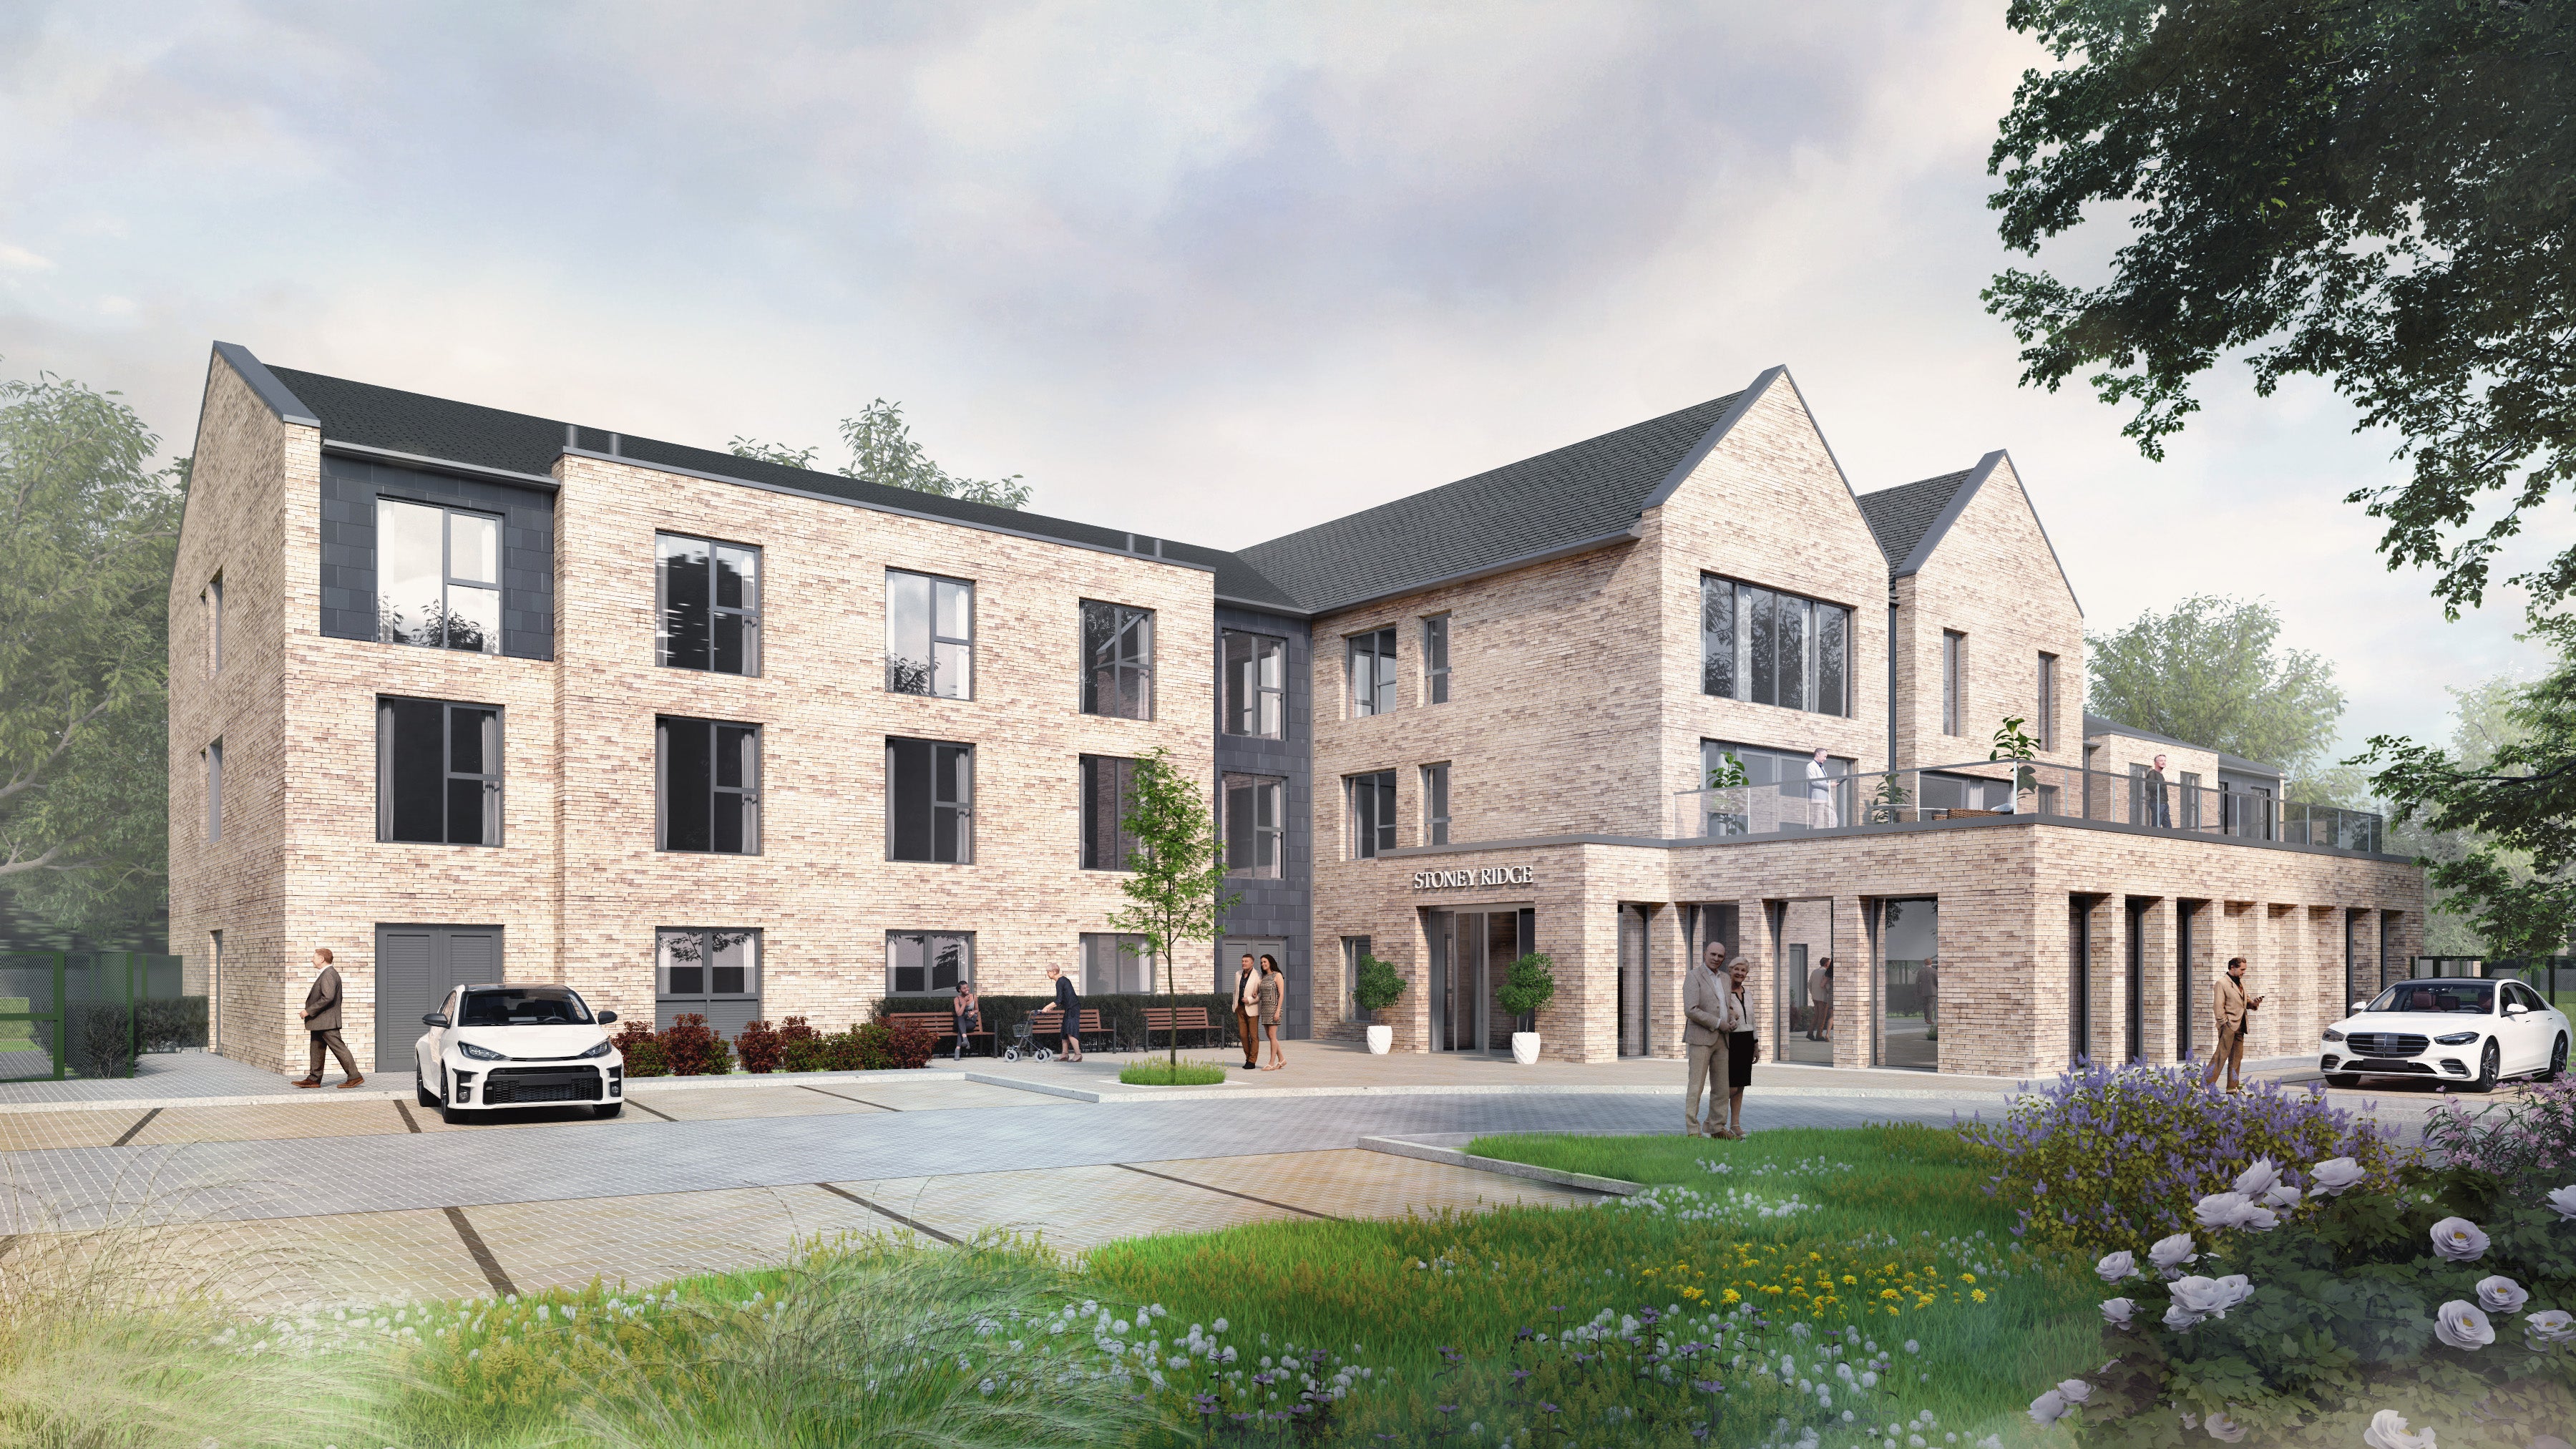 CGI of proposed 72-bedroom care home in Bingley, West Yorkshire